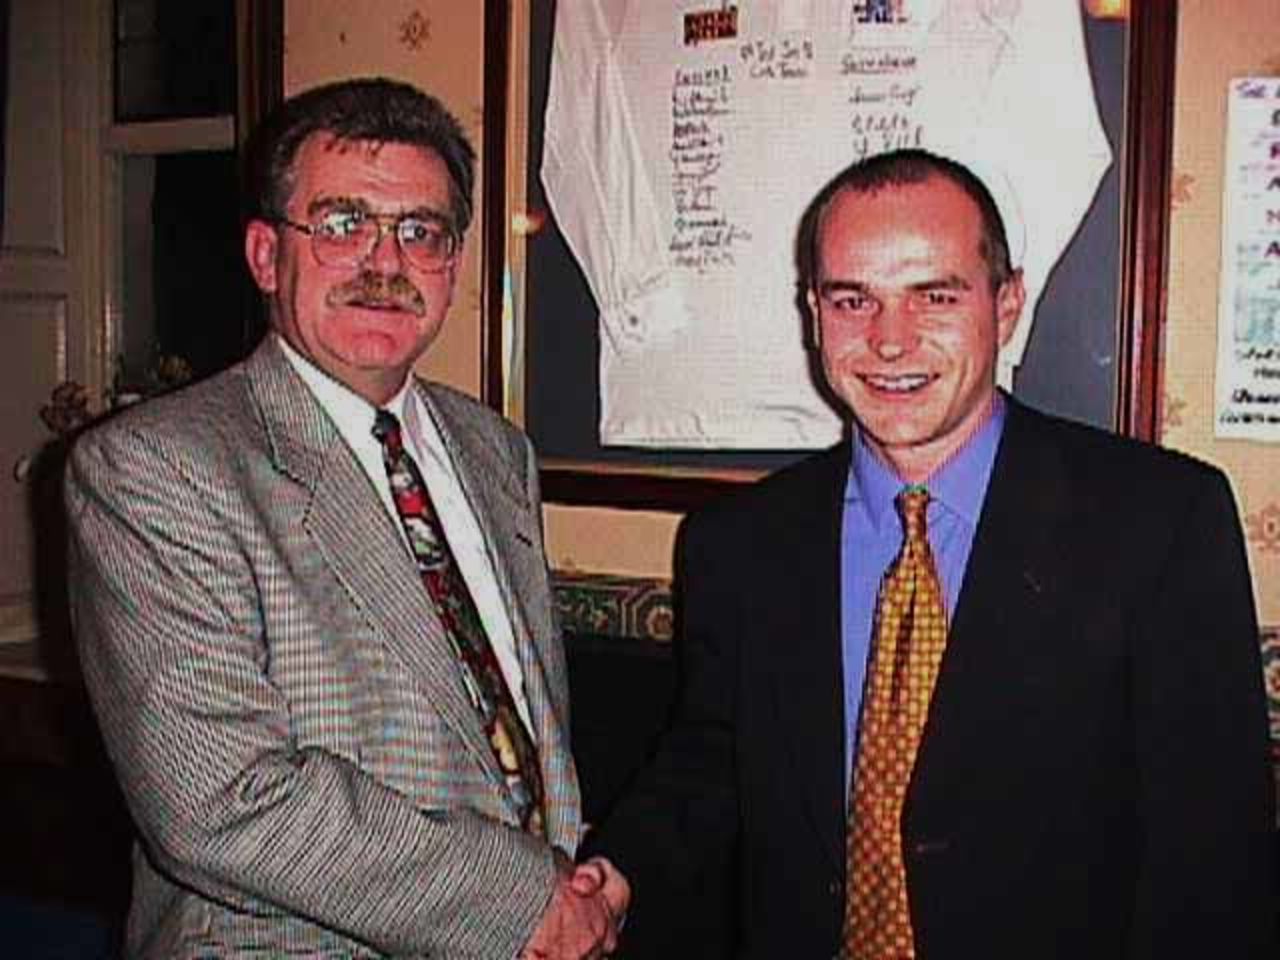 Robin Foster (left) and Graham Lloyd at Sportsmans Dinner for Graham Lloyd's Benefit at the Griffin's Head in Huncoat